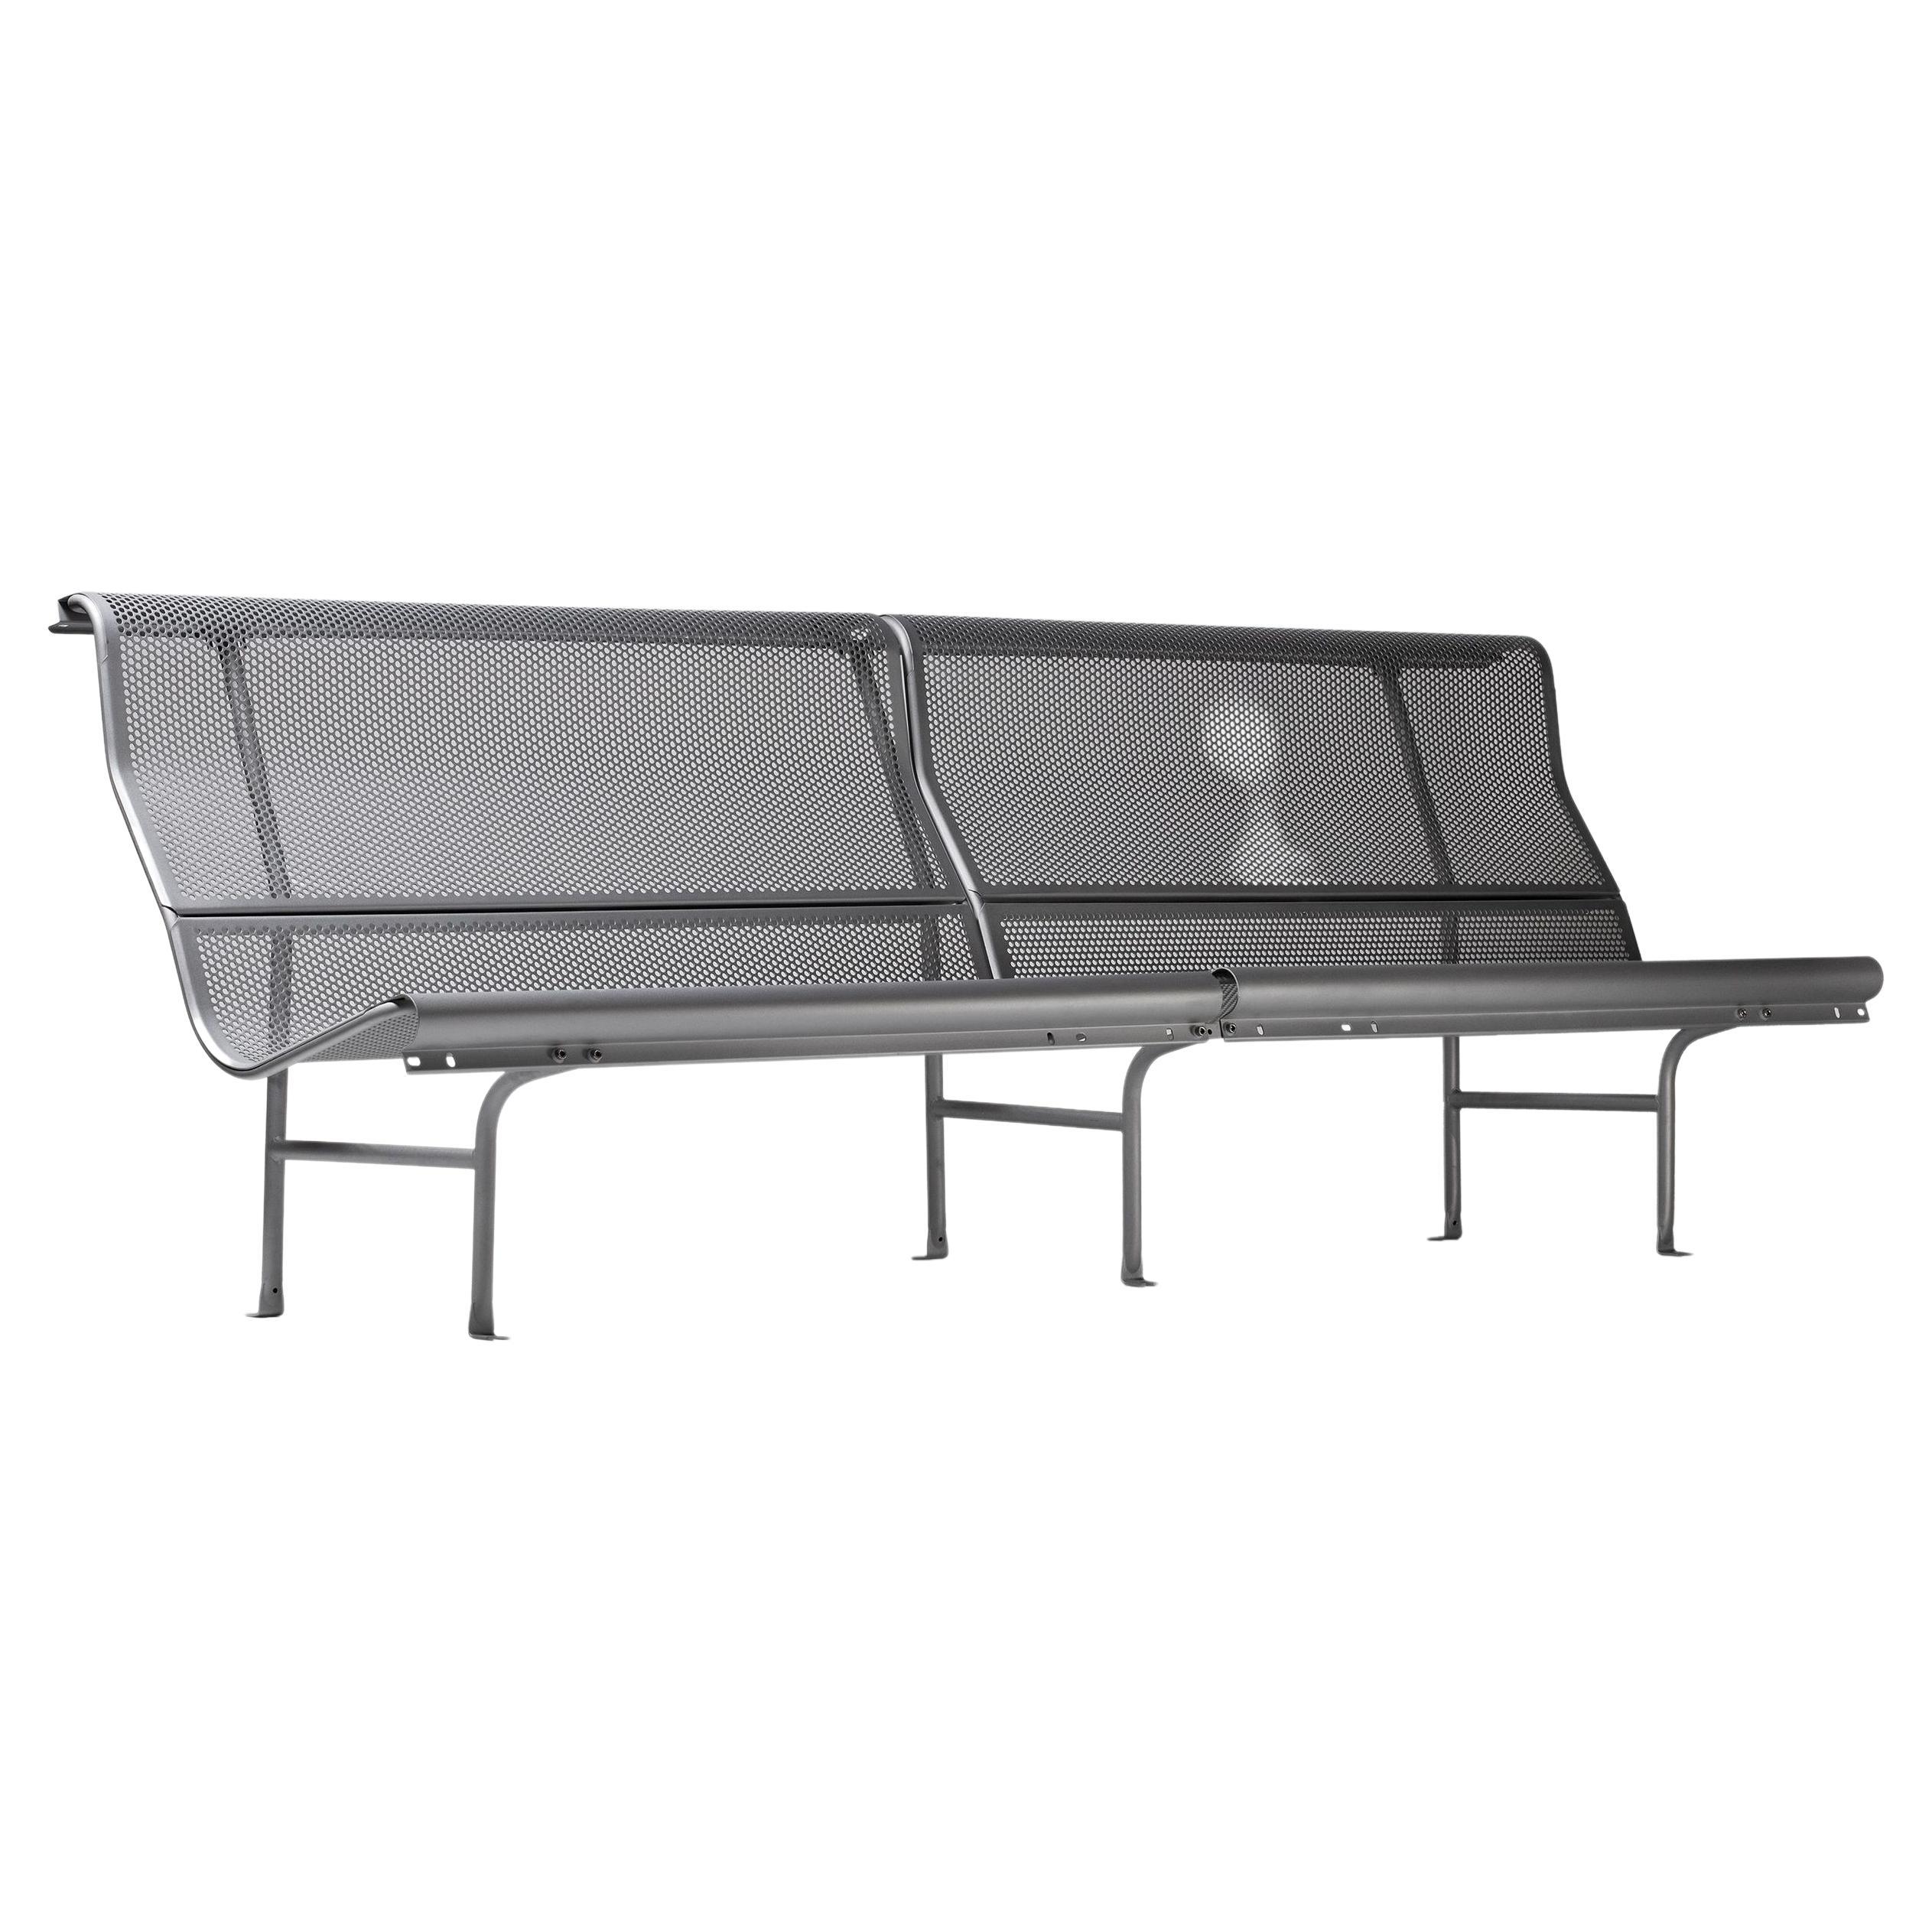 Outdoor public bench model "Perforano" silver painted steel Spanish design